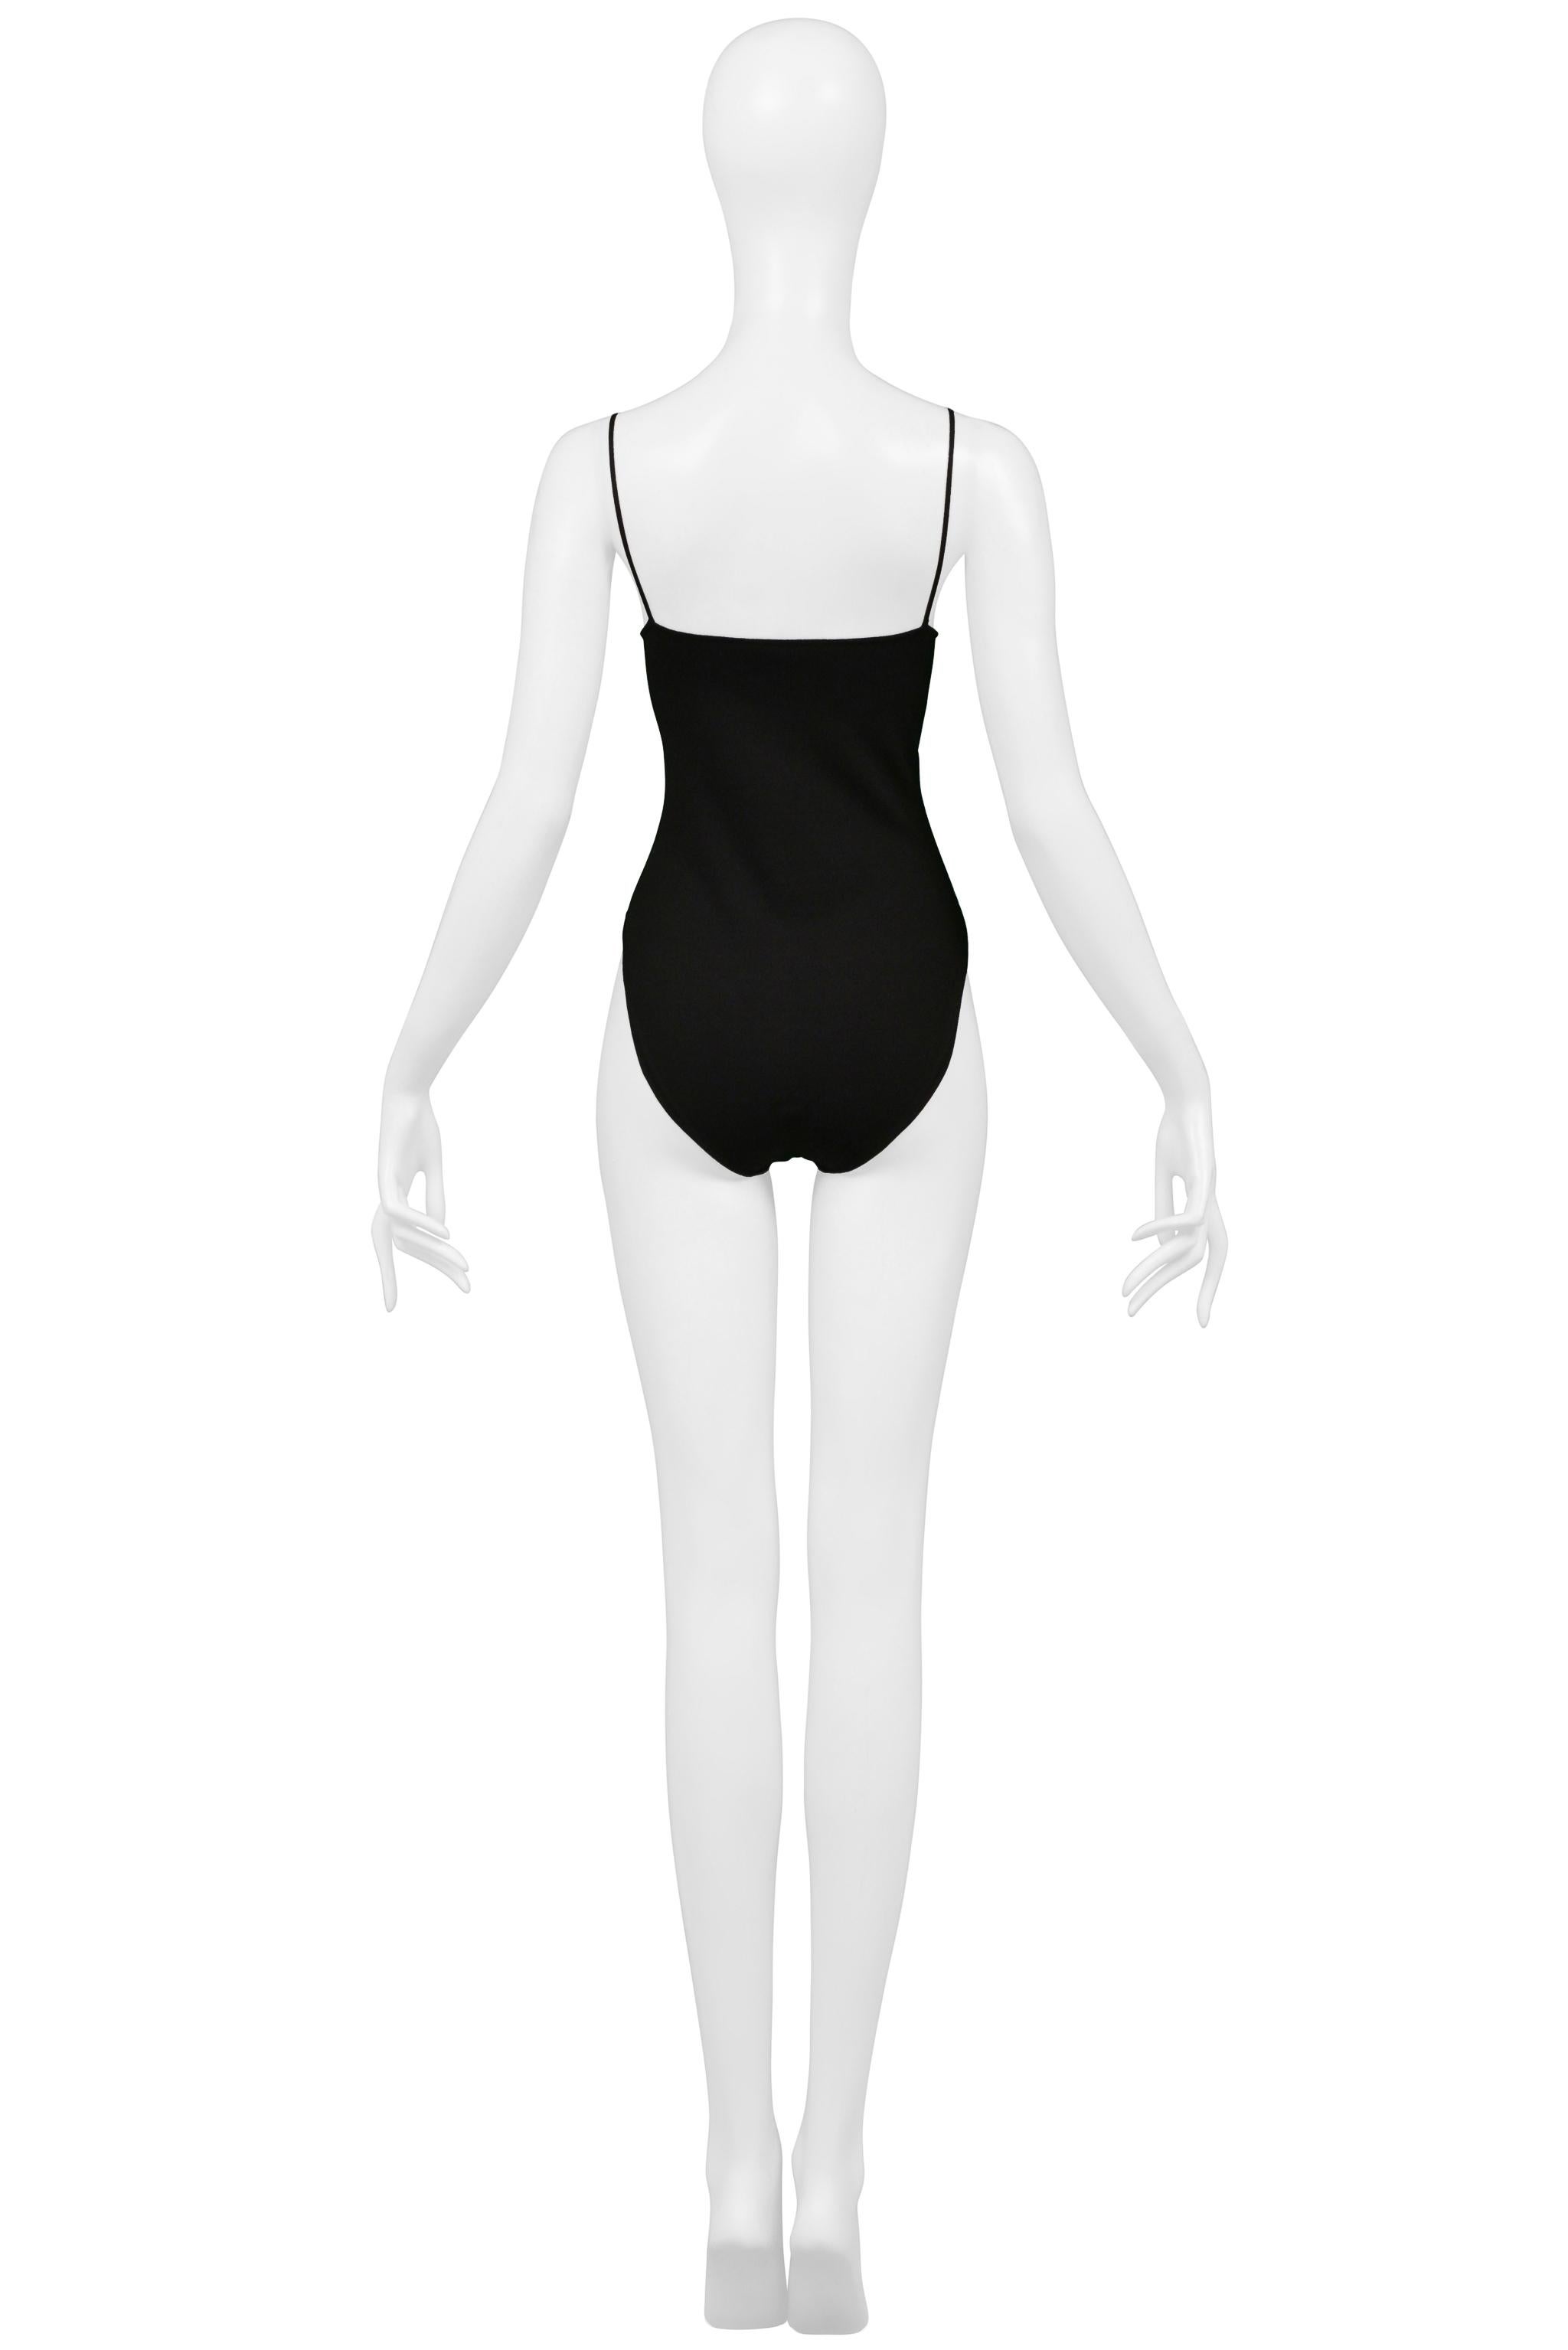 Gucci By Tom Ford Black Viscose One Piece Bodysuit 1998 For Sale 1